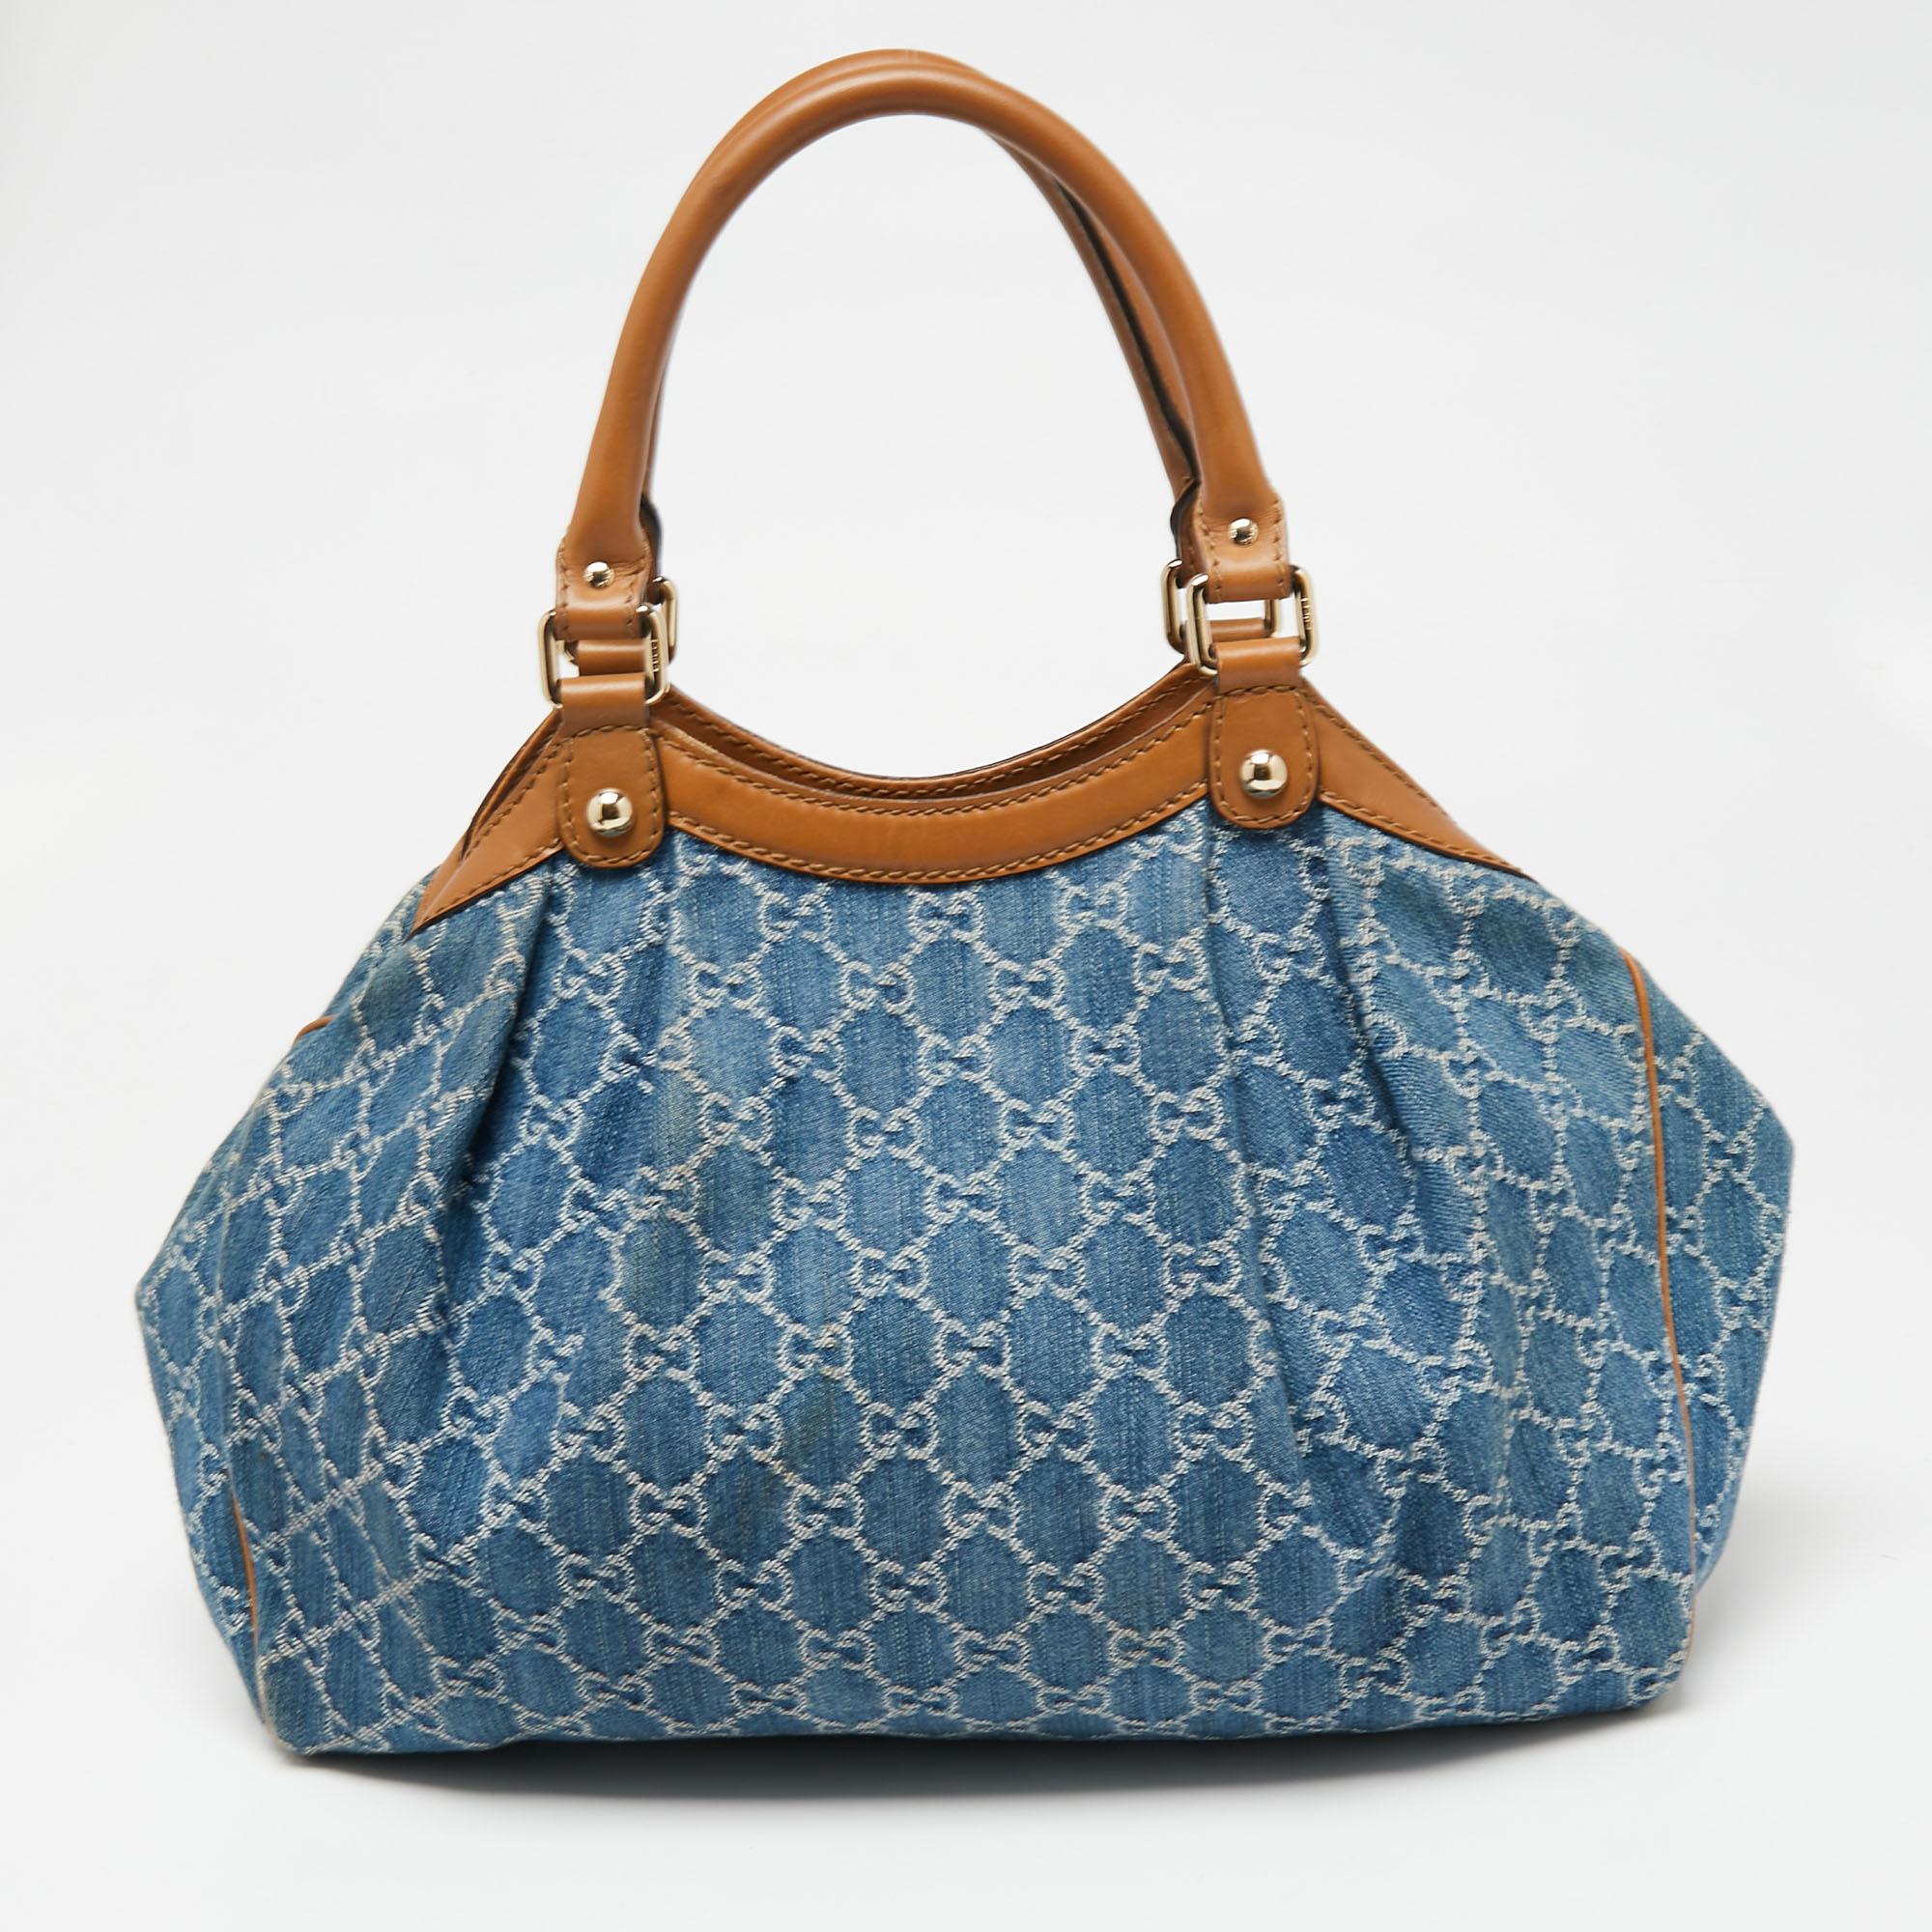 Enriched with signature details, this Sukey tote from Gucci will surely win your vote as a favorite. It comes crafted from GG denim and leather and flaunts dual handles, a branded charm, and neat pleats. Lined with fabric, its spacious interior